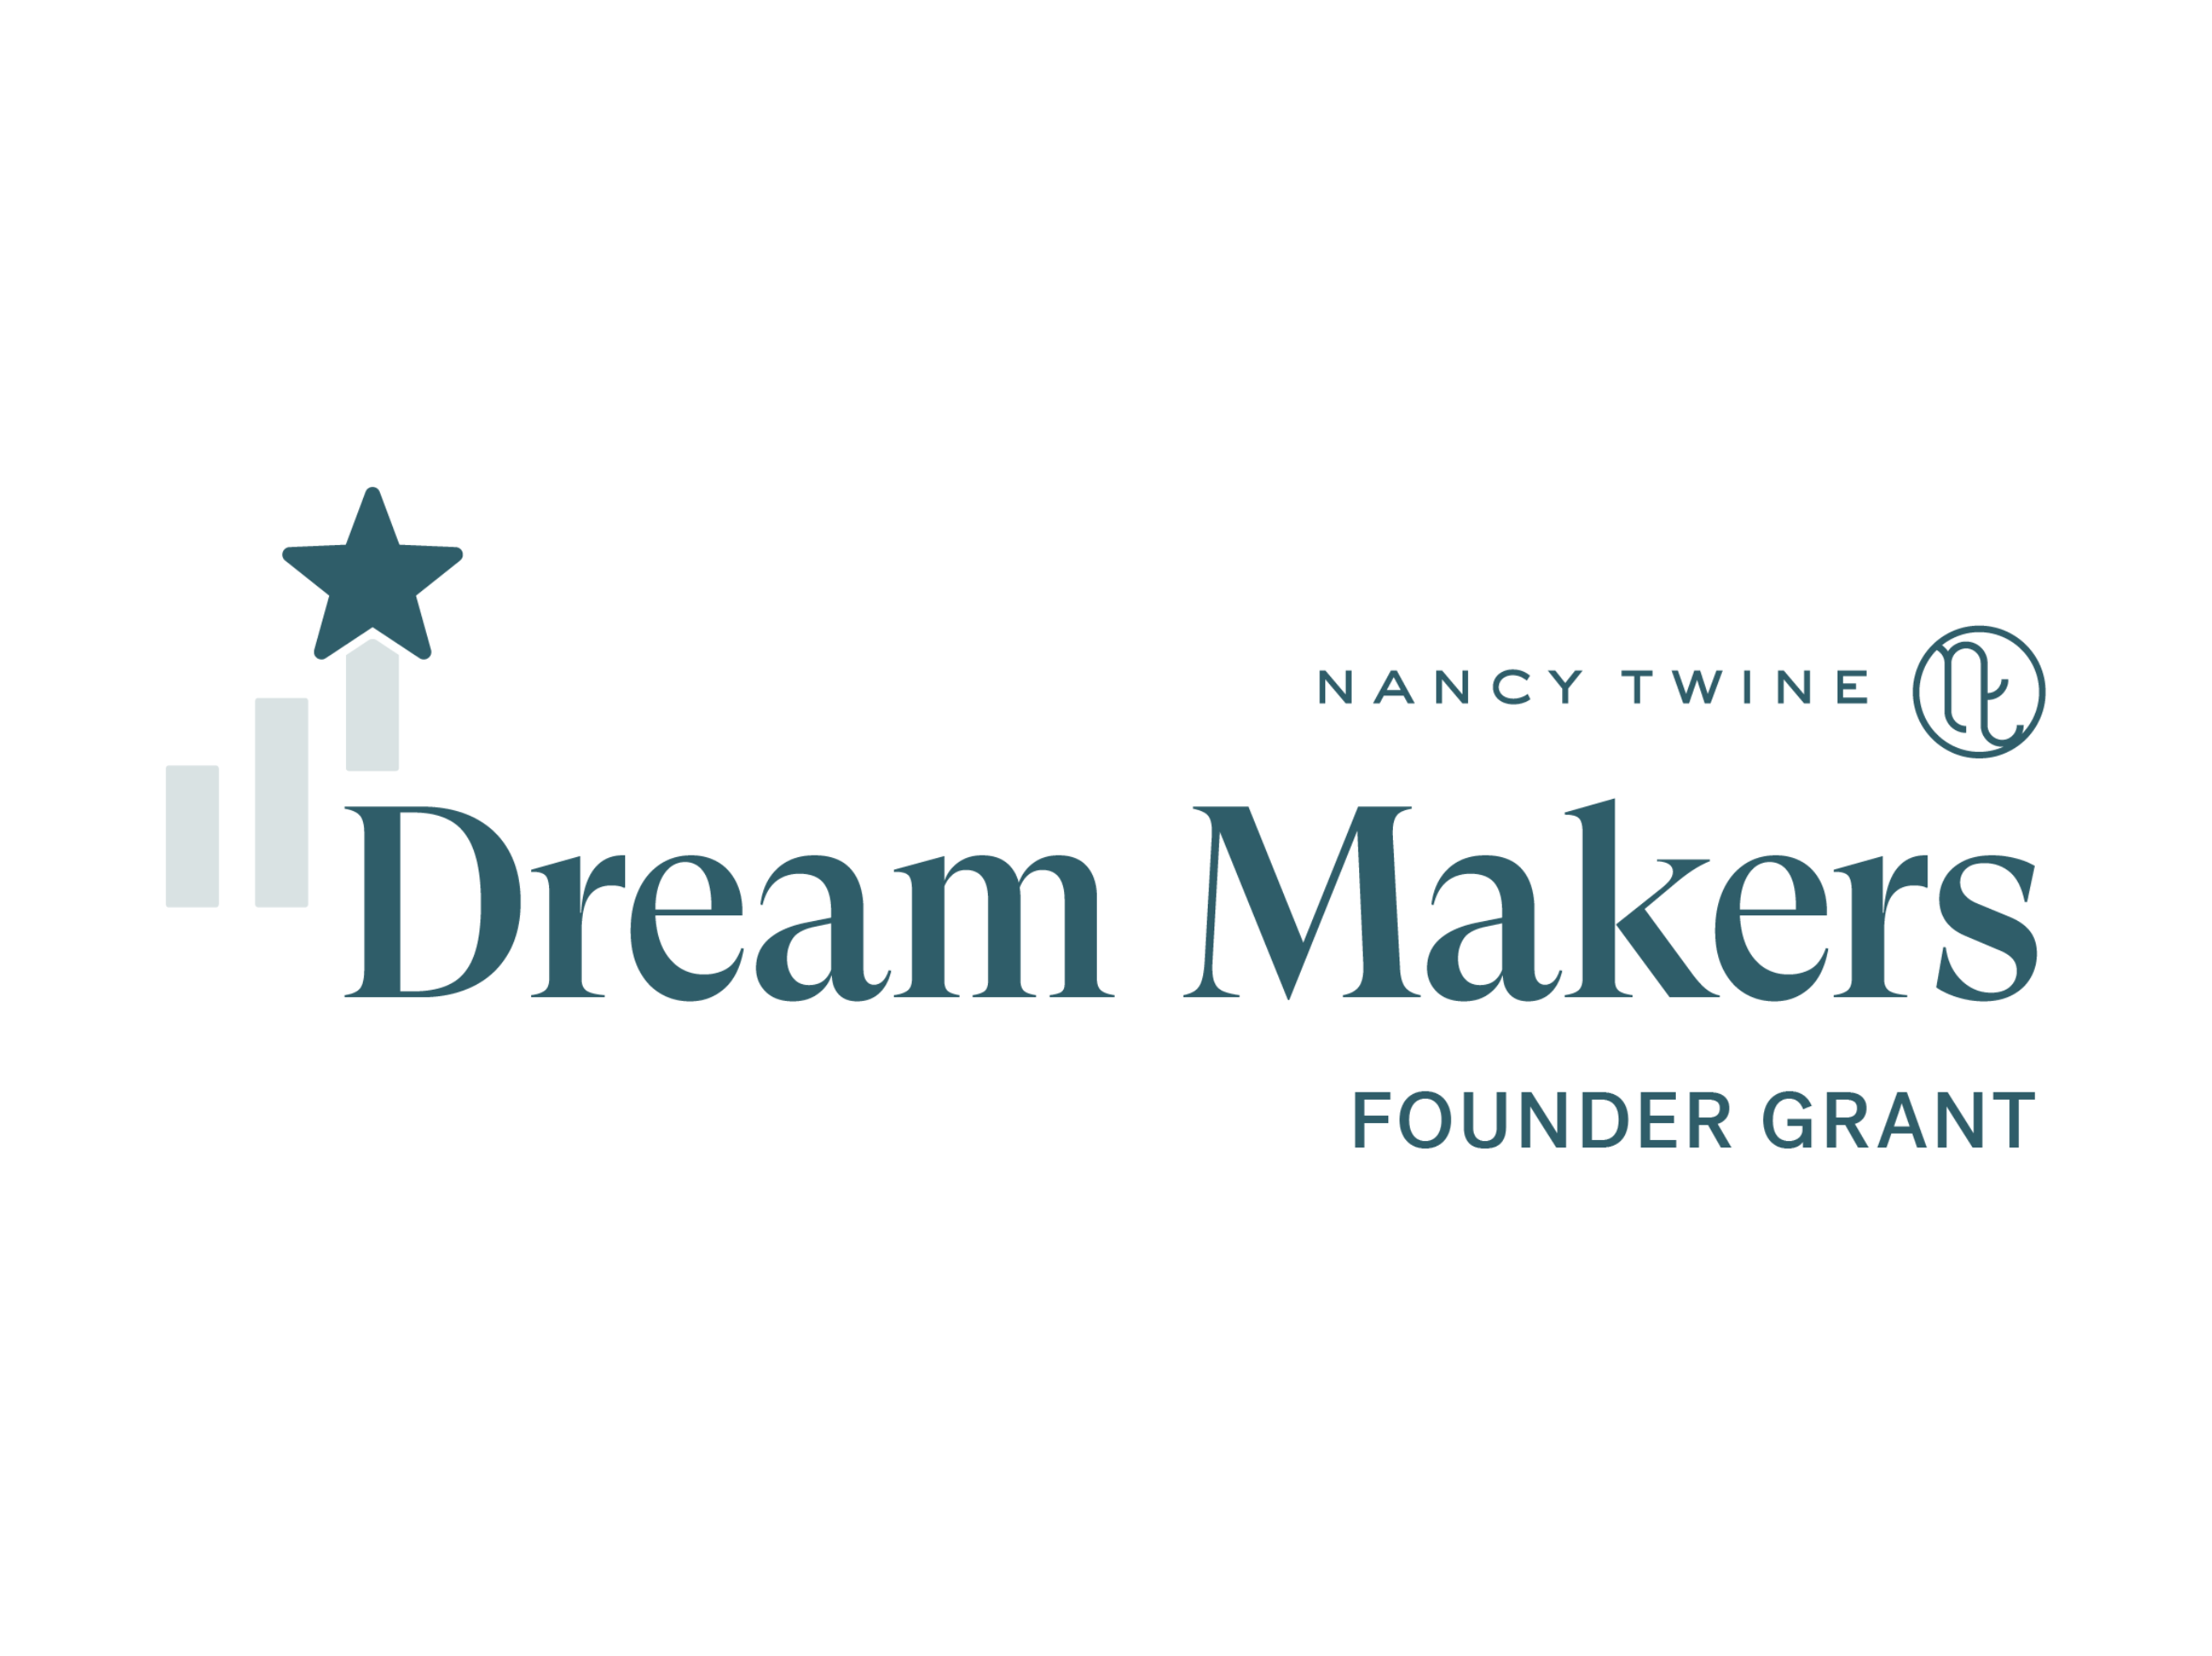 Logo image of Nancy Twine's one million dollar grant initiative designed to empower underrepresented female founders in the consumer goods industry.